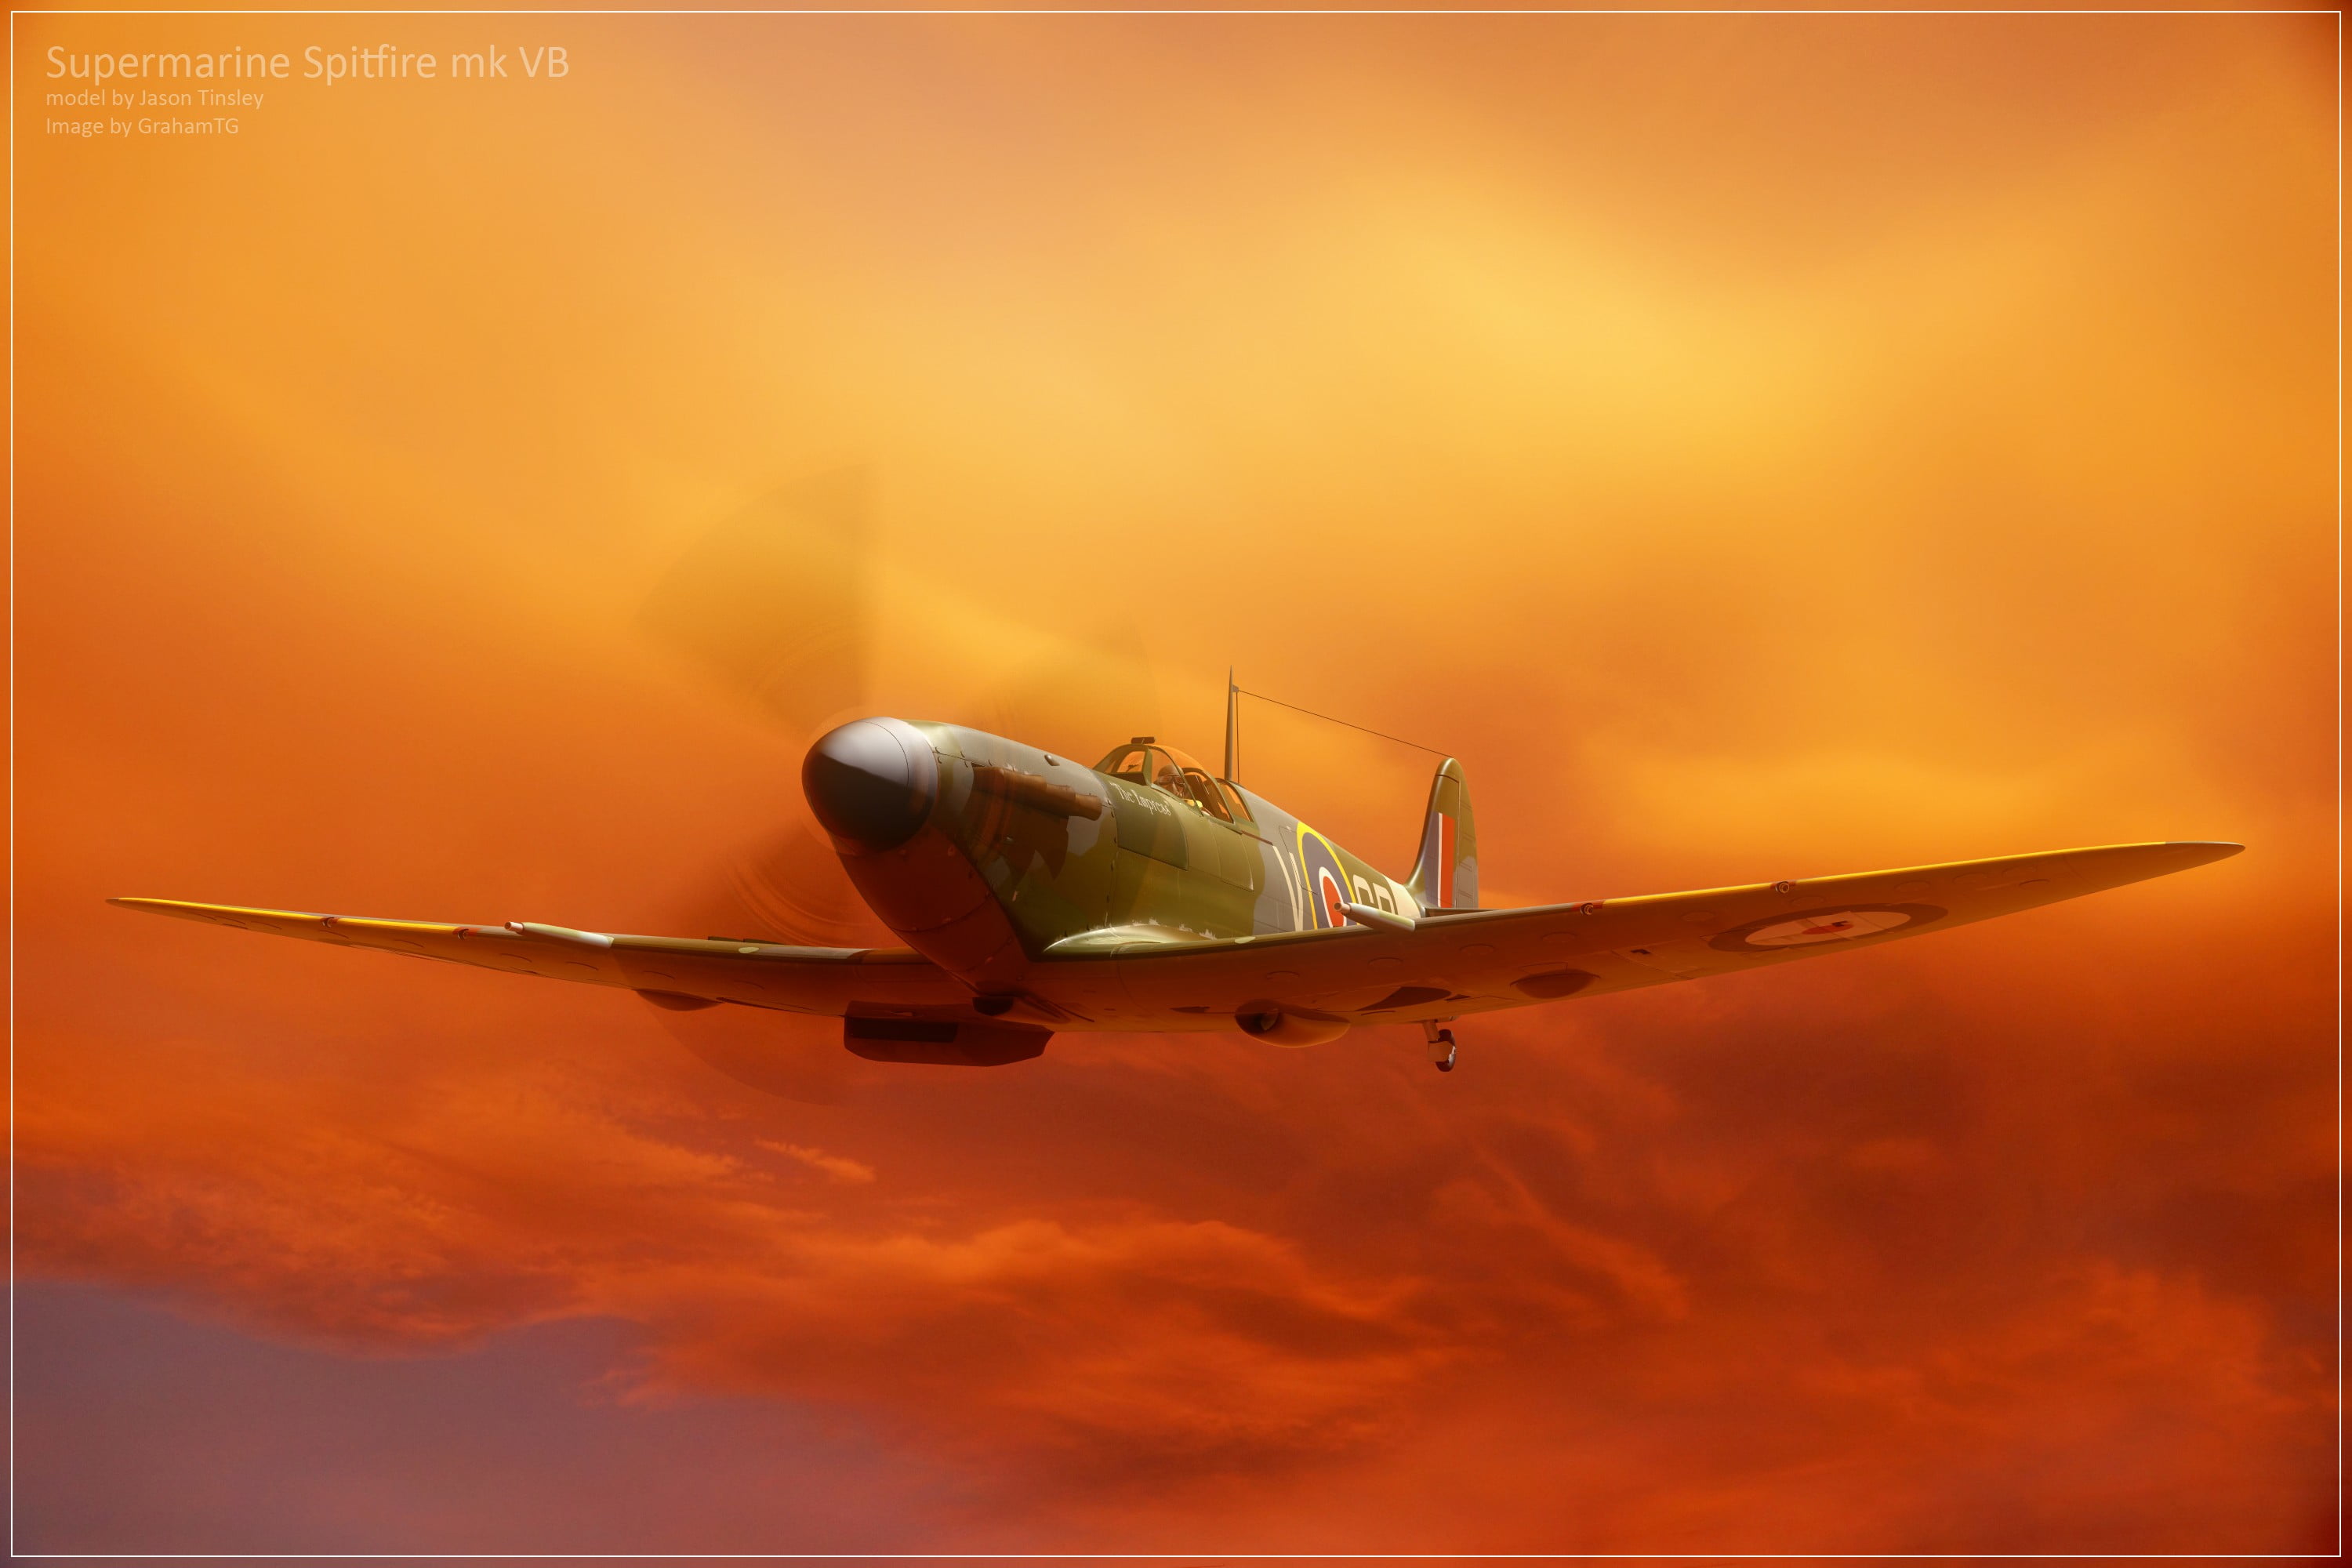 Black And Gray Fishing Rod, Supermarine Spitfire, Airplane, - Spitfire Artwork , HD Wallpaper & Backgrounds